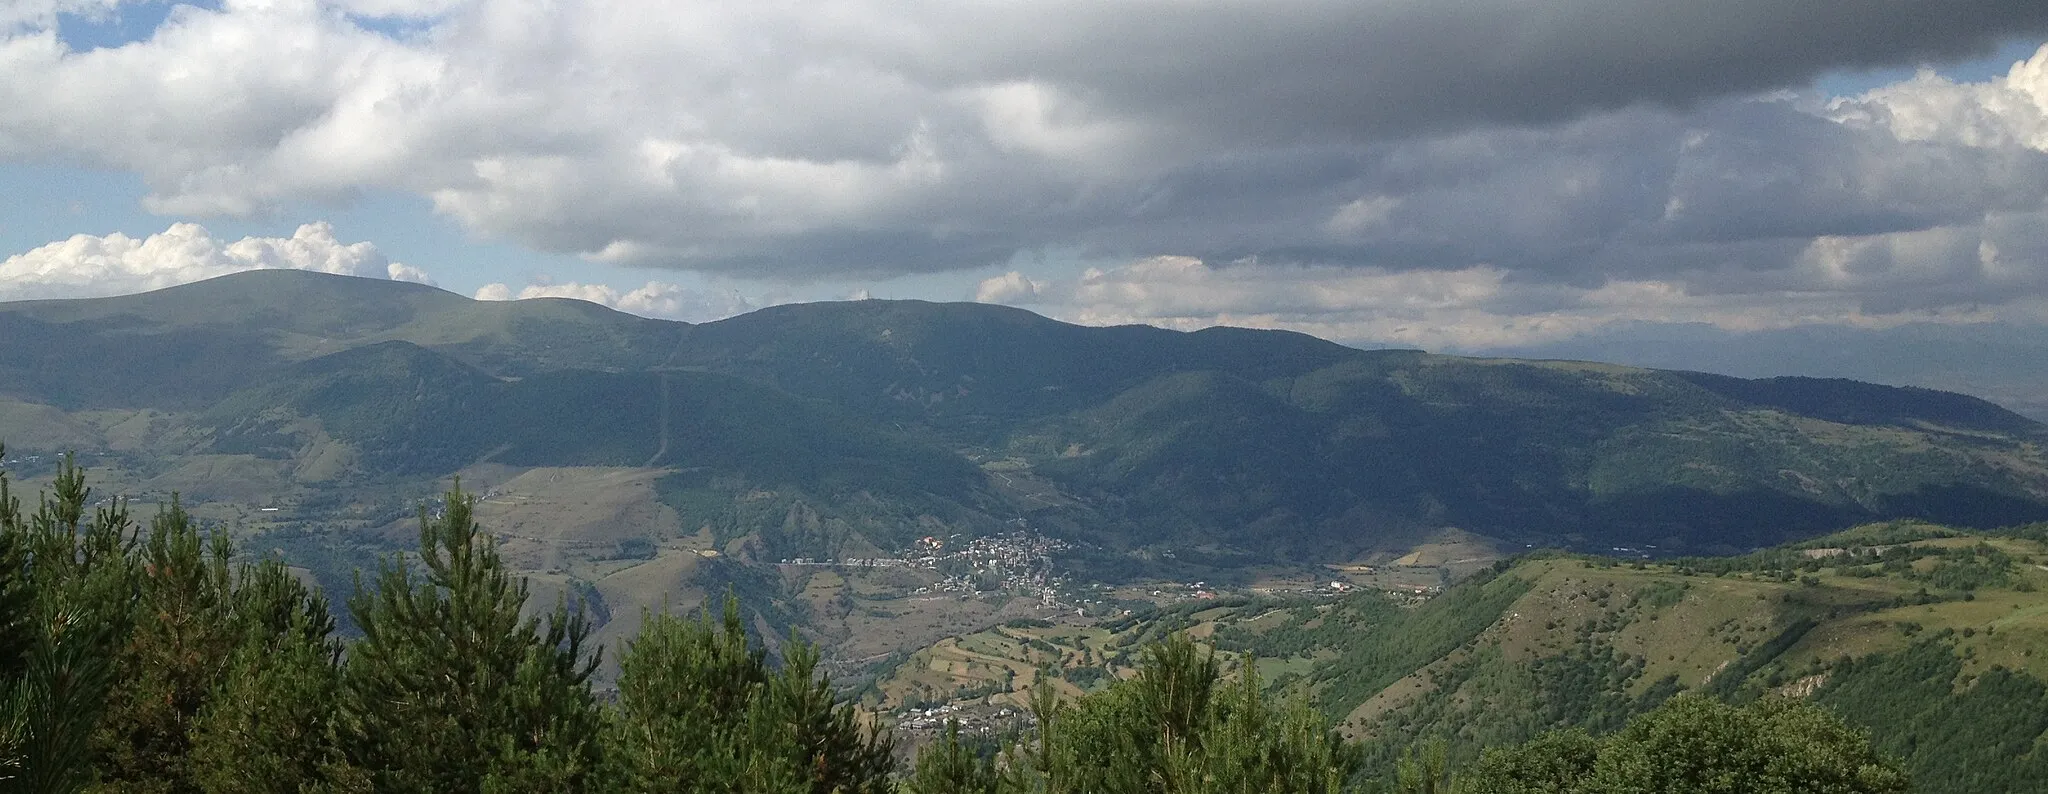 Photo showing: View of Posof from Ilgar Mountain. Posof is the capital town of Posof District of Ardahan Province in northeastern end of Turkey. It locates near Georgia-Turkey border.